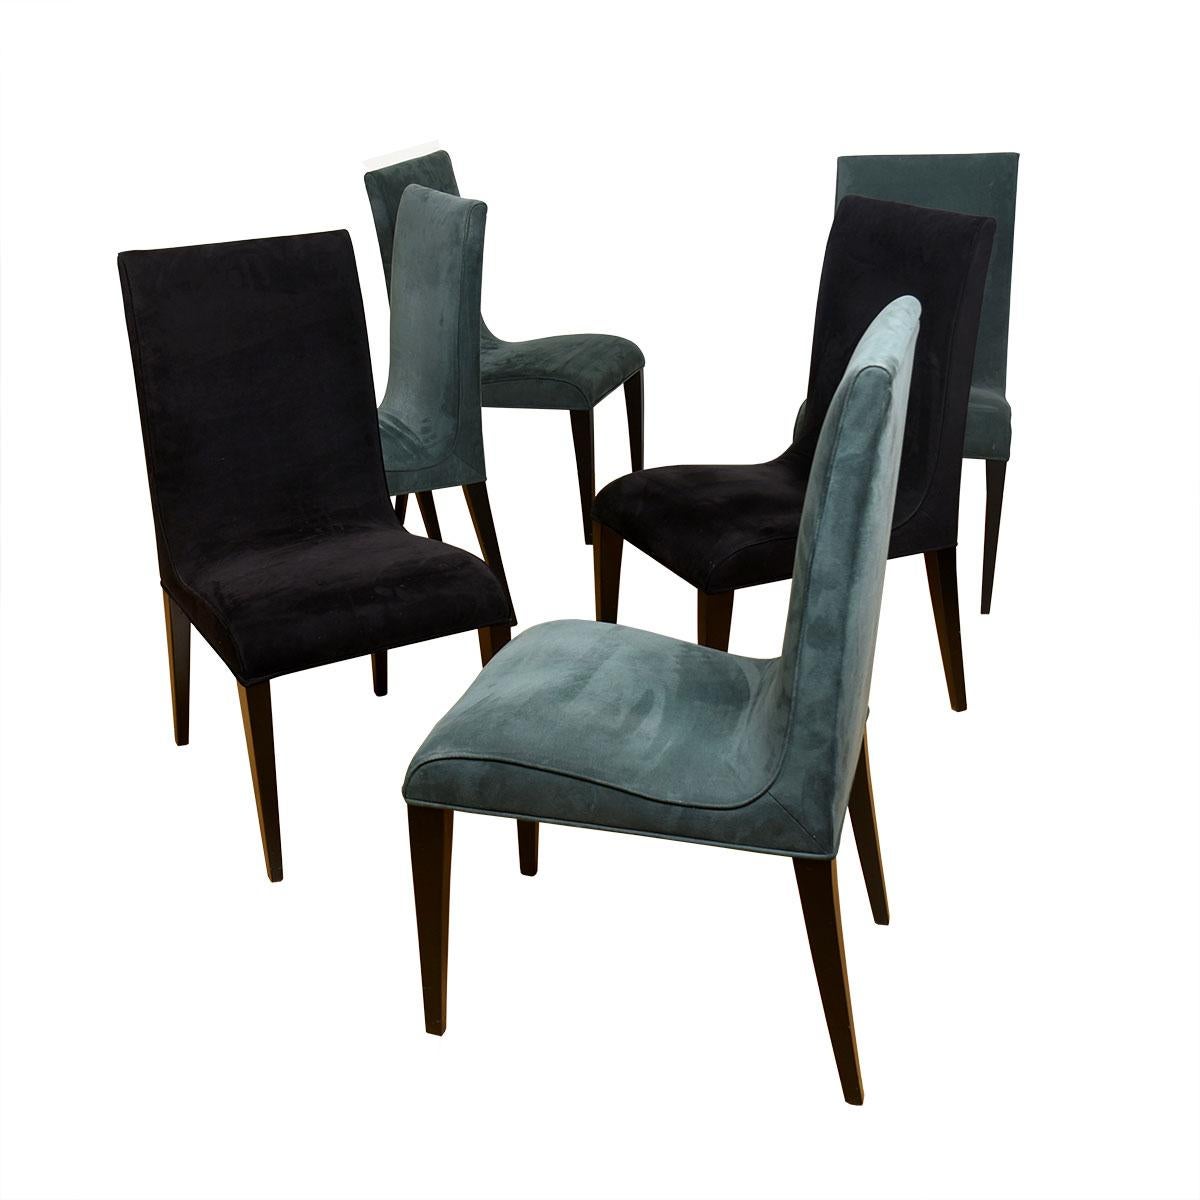 Set of 6 Contemporary Dining Chairs from Theodore’S Upholstered In Ultra Suede

Additional information:
Material: Upholstery, wood
Featured at Kensington:
Sinuous & sensual, these chairs conform to your body for a comfortable sit.
Beautiful